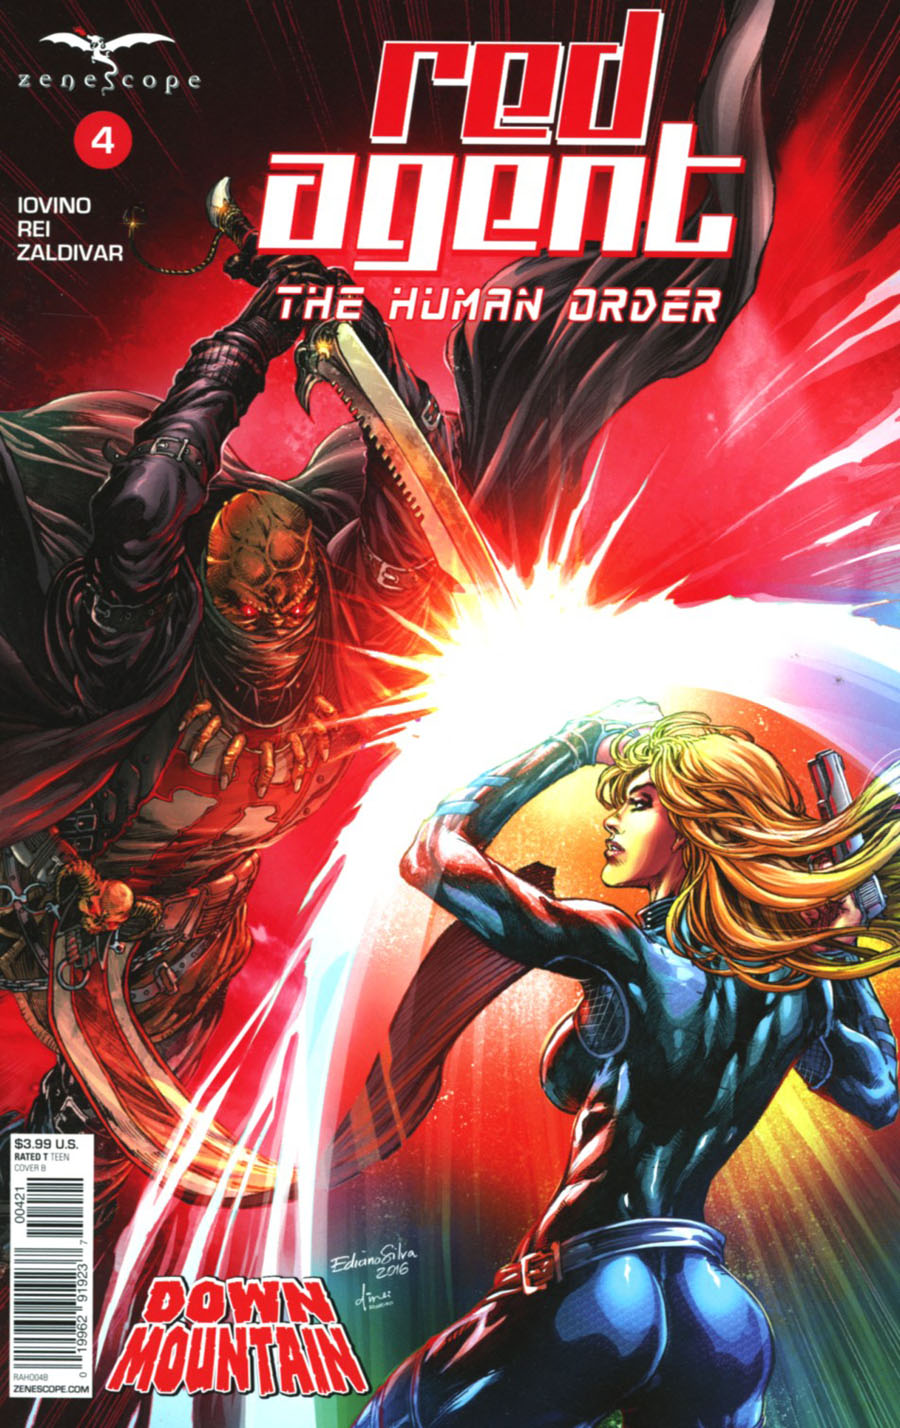 Grimm Fairy Tales Presents Red Agent Human Order #4 Cover B Ediano Silva